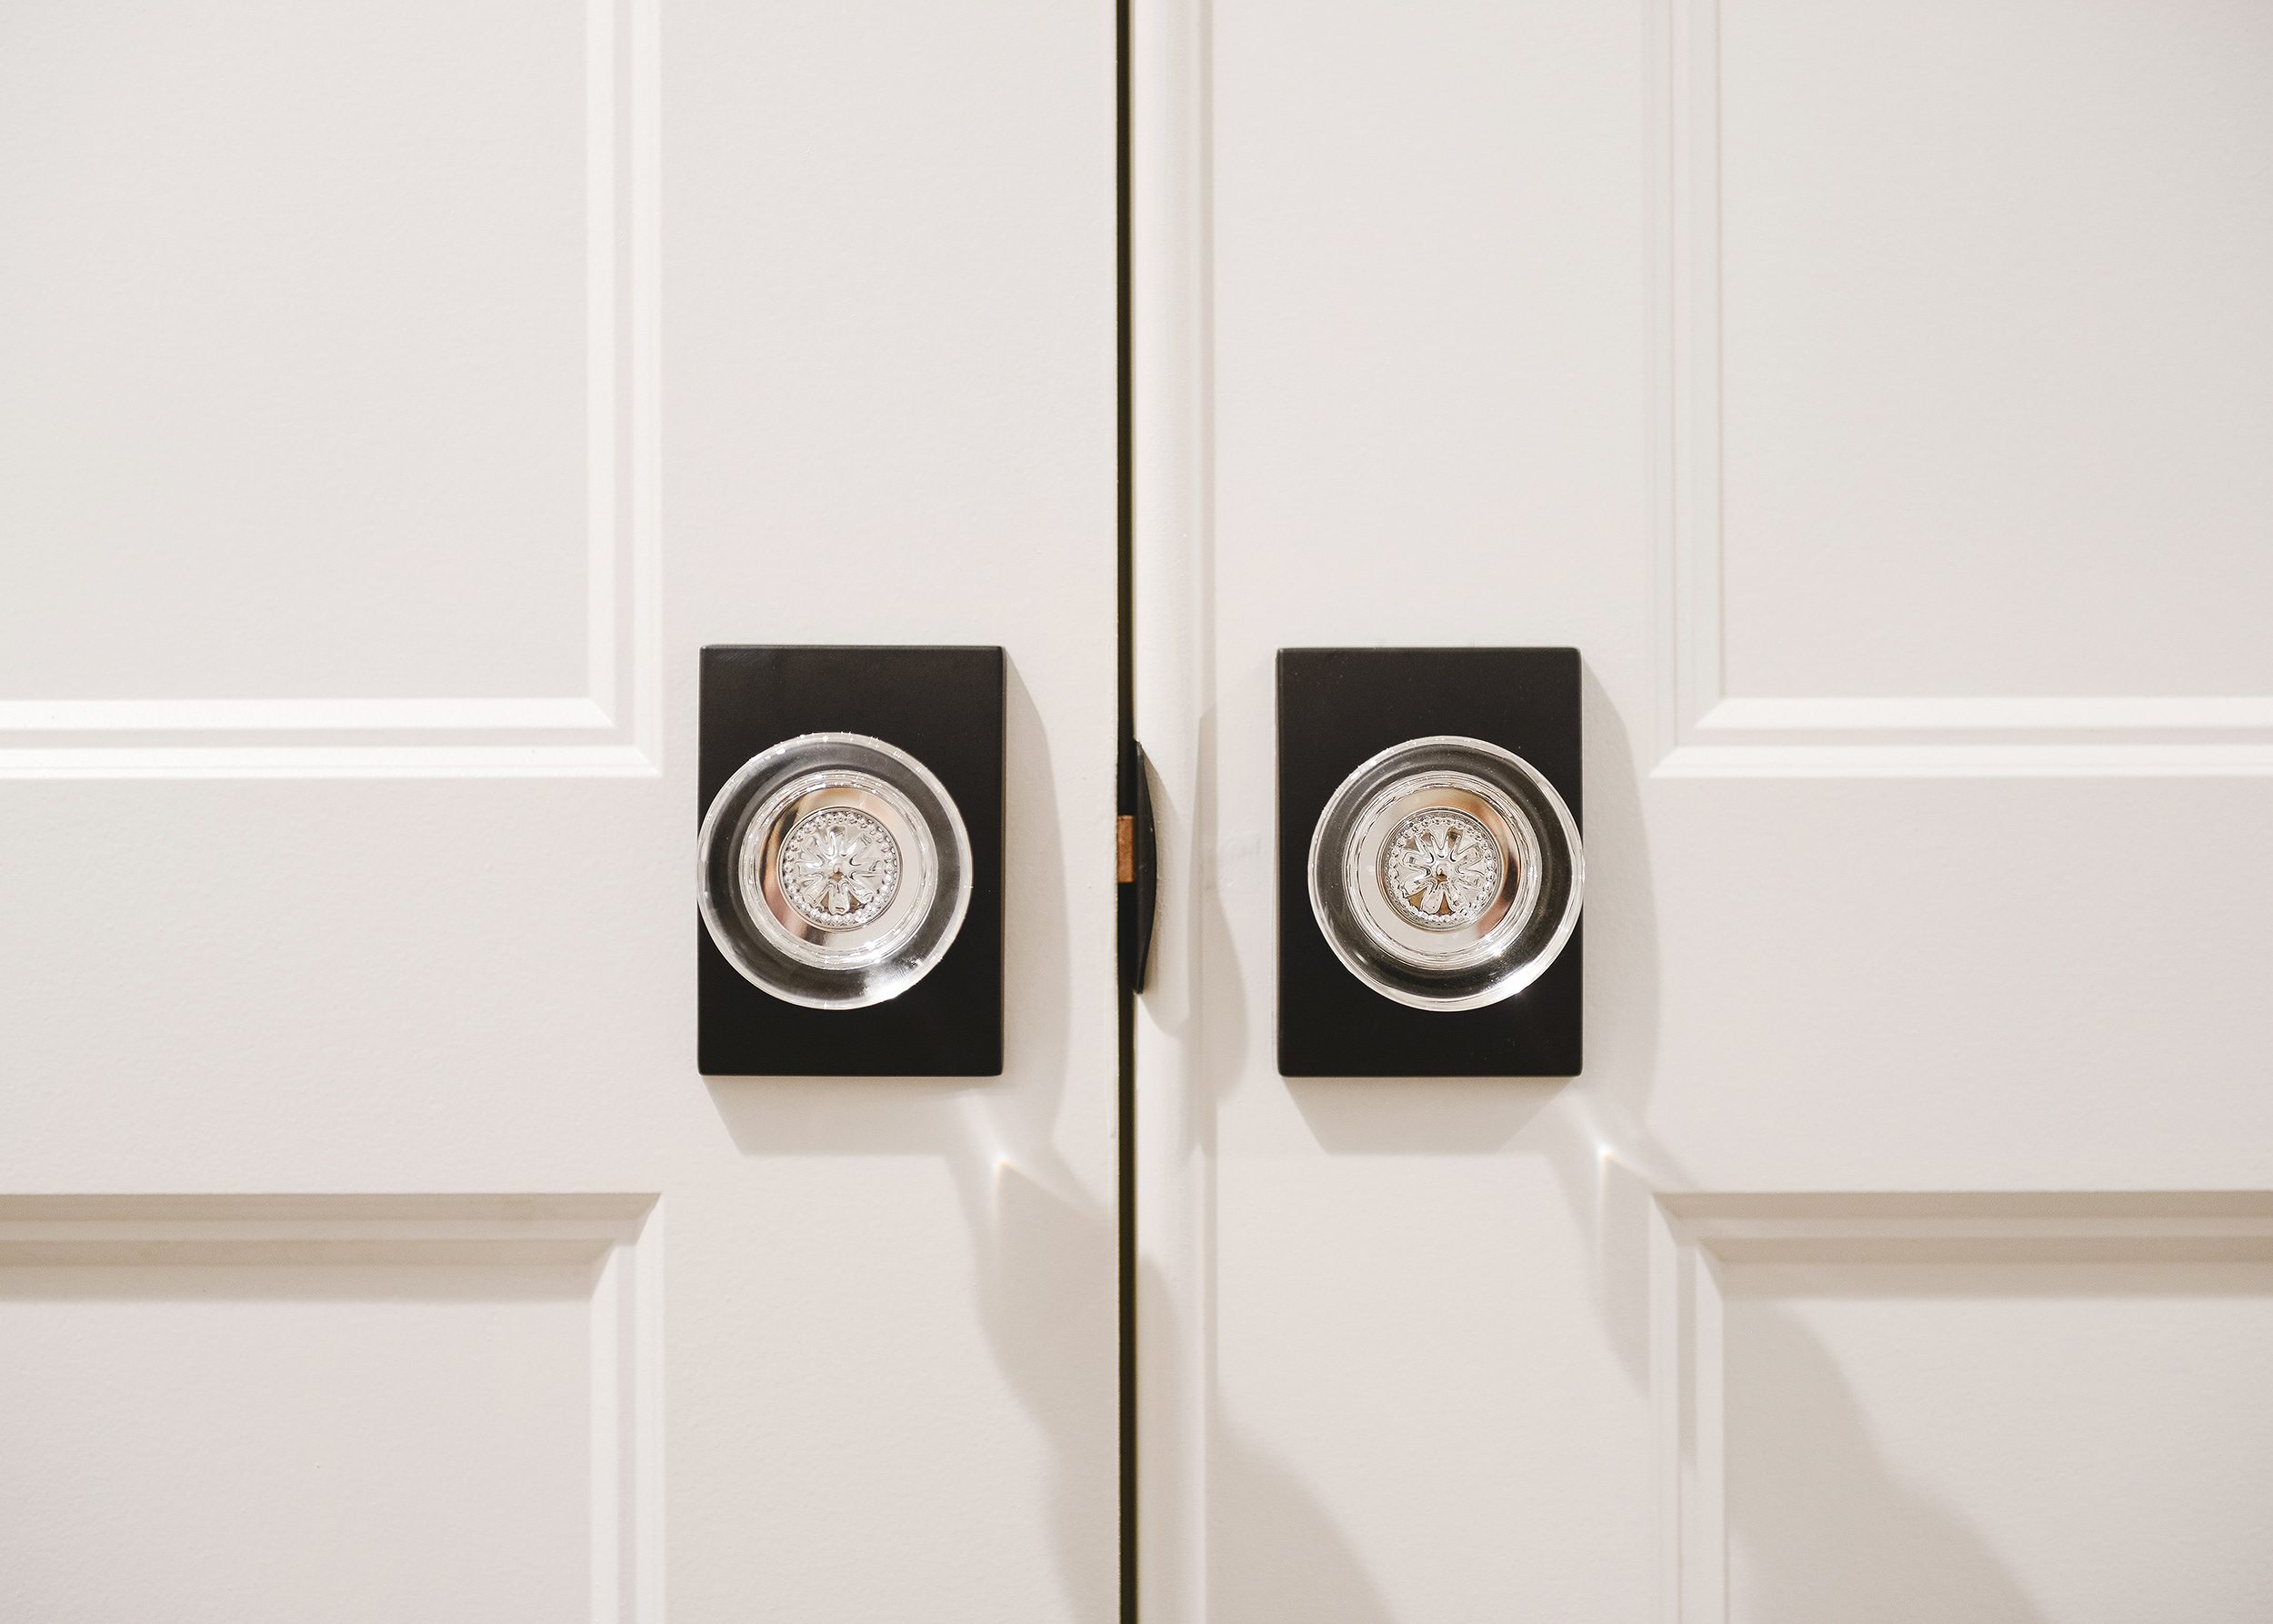 Schlage custom hobson glass knob detail, pair of knobs side-by-side | via Yellow Brick Home